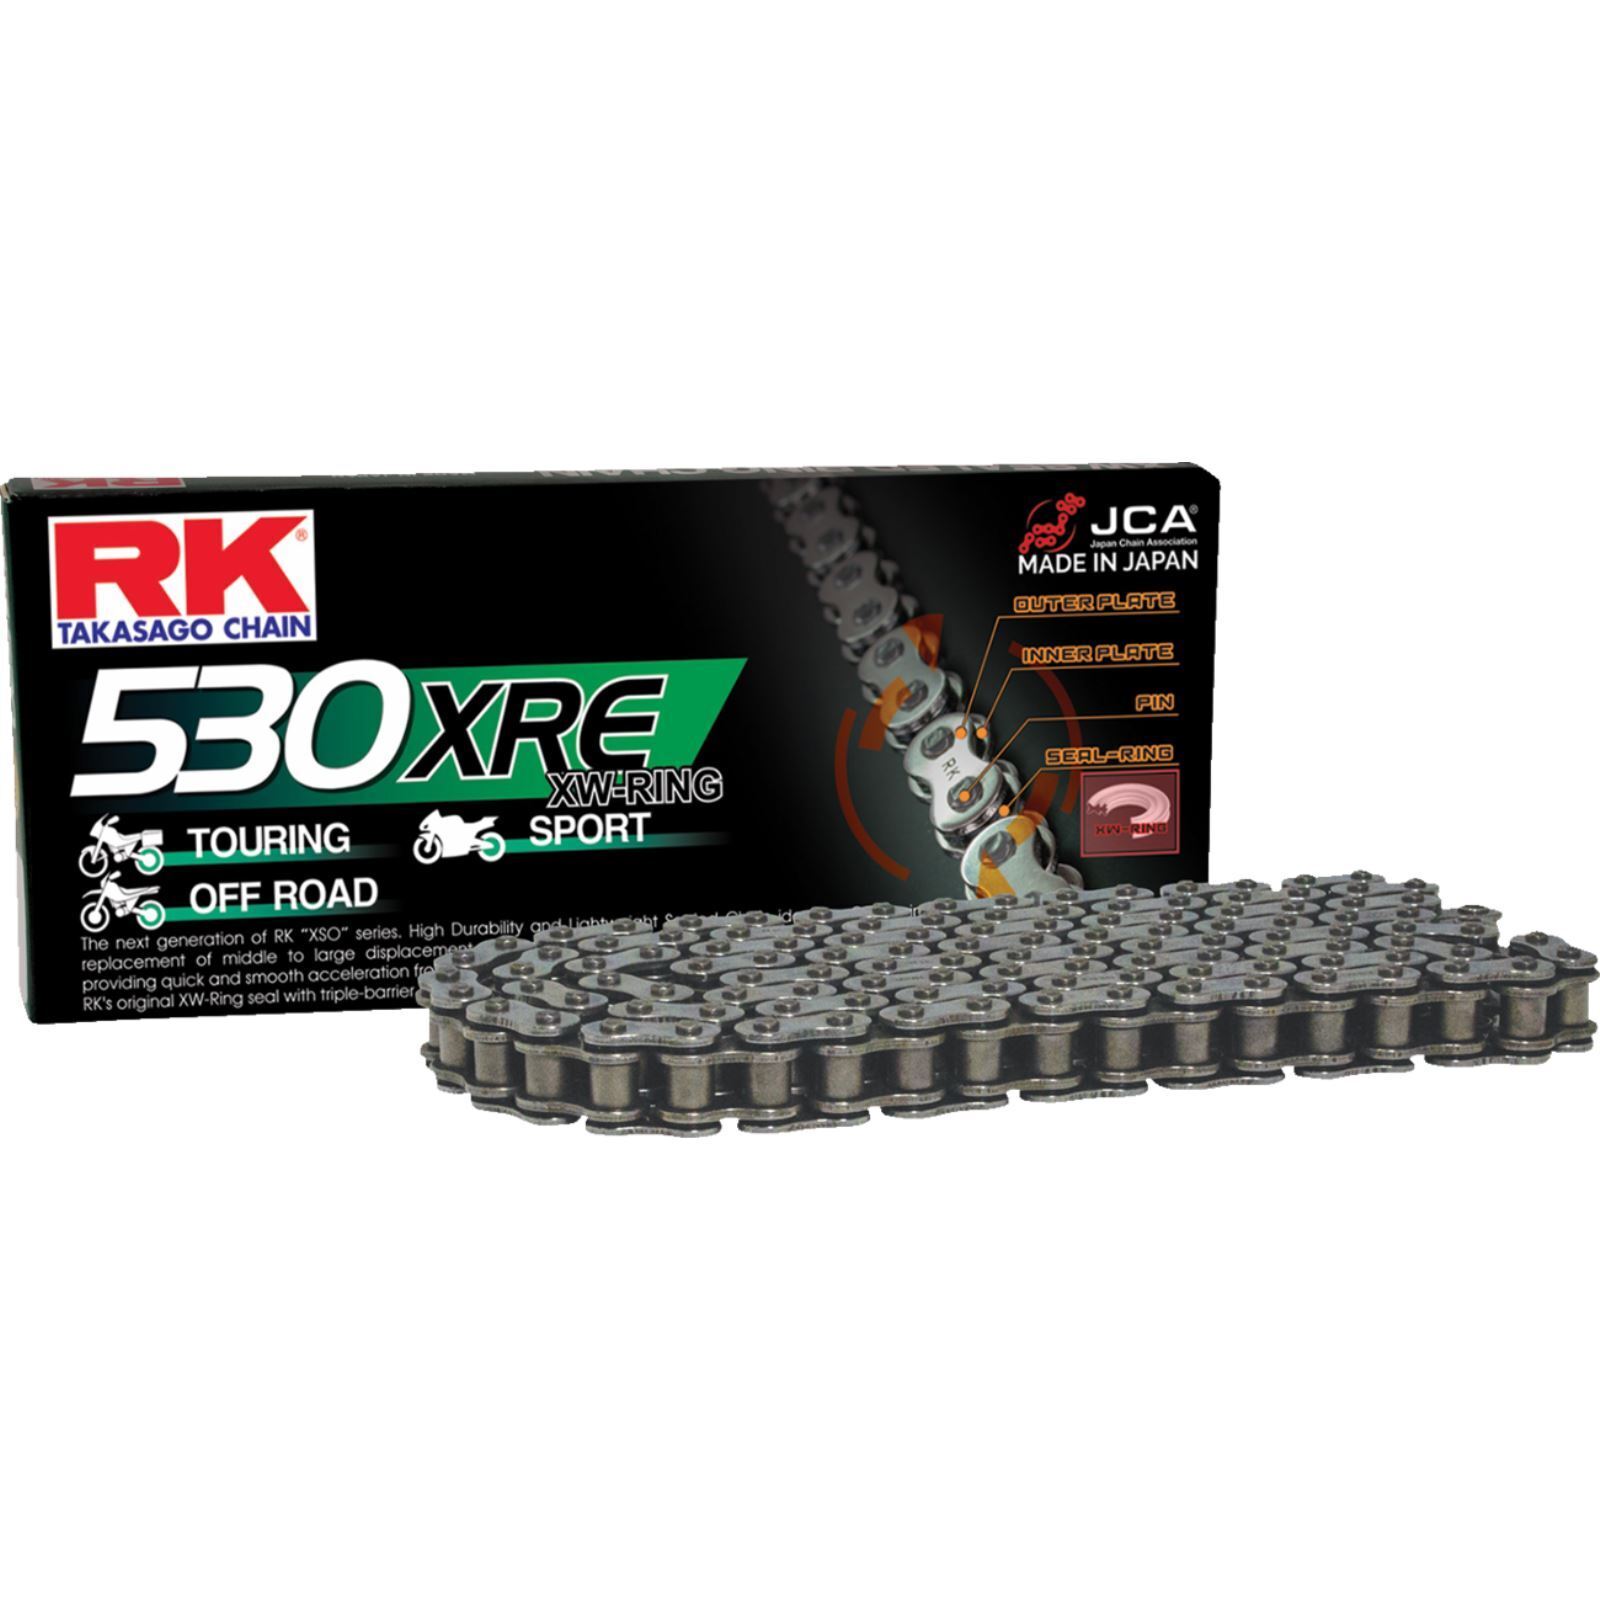 RK Excel 530 XRE - Drive Chain - 116 Links 530XRE-116